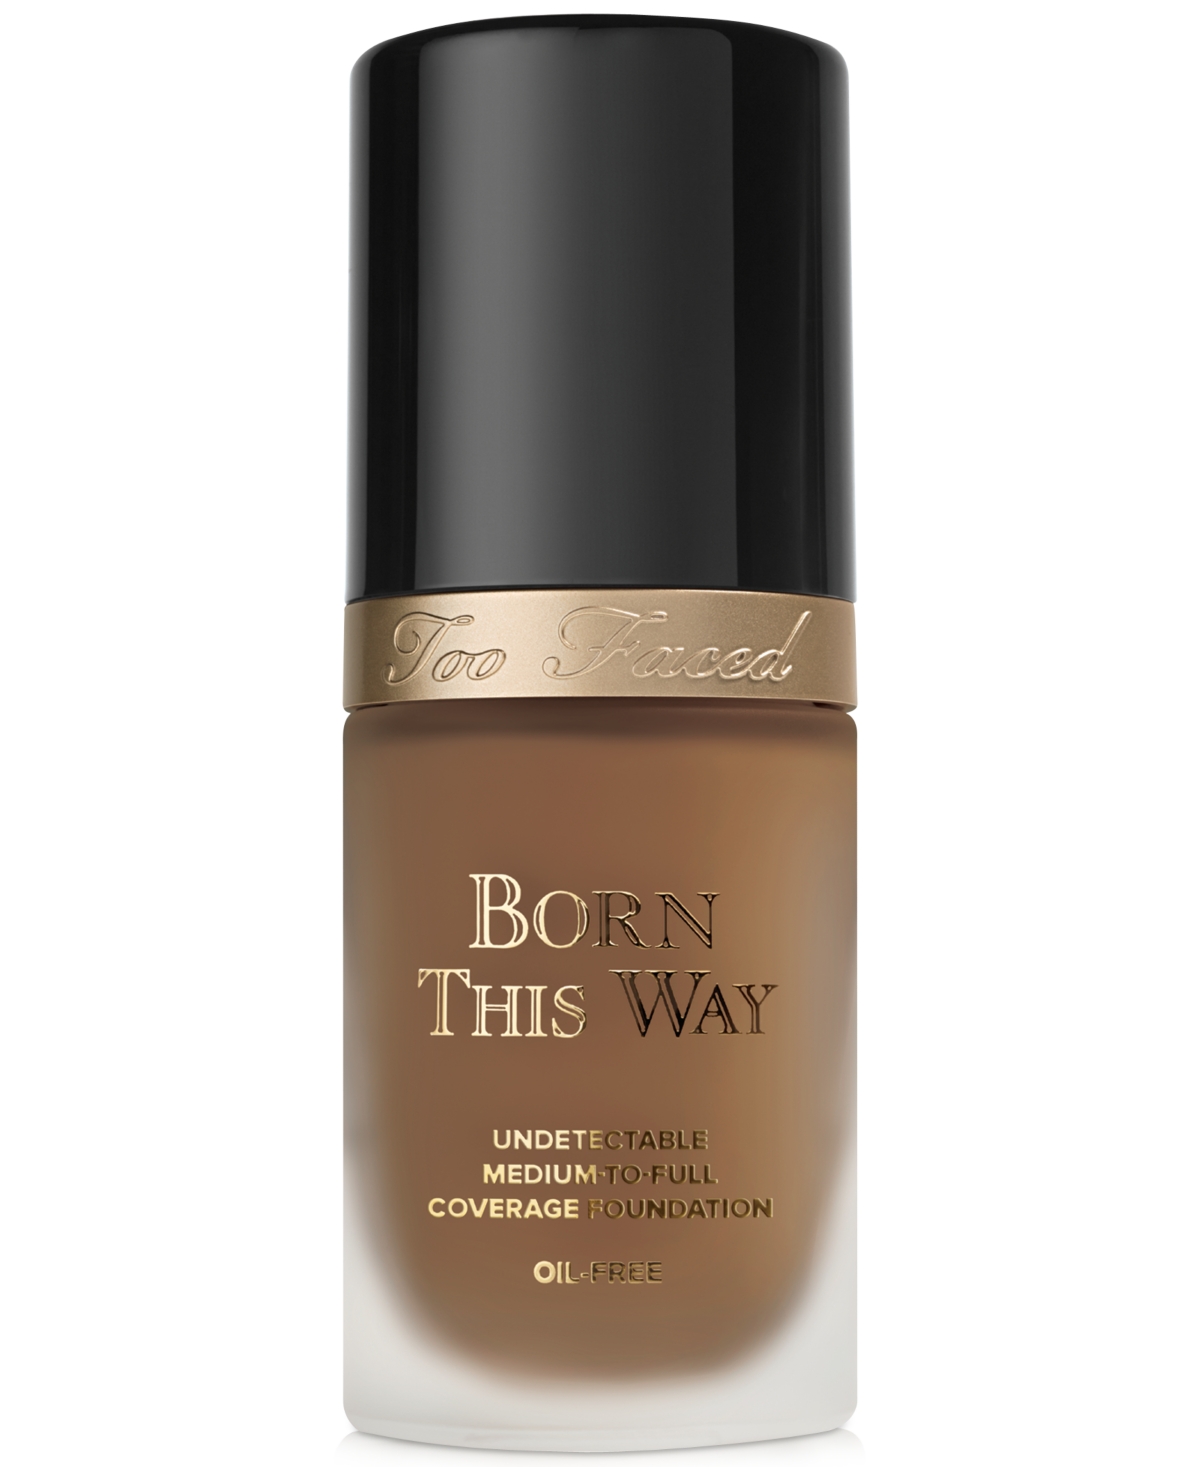 Too Faced Born This Way Flawless Coverage Natural Finish Foundation In Mahogany - Very Deep W,golden Undertones